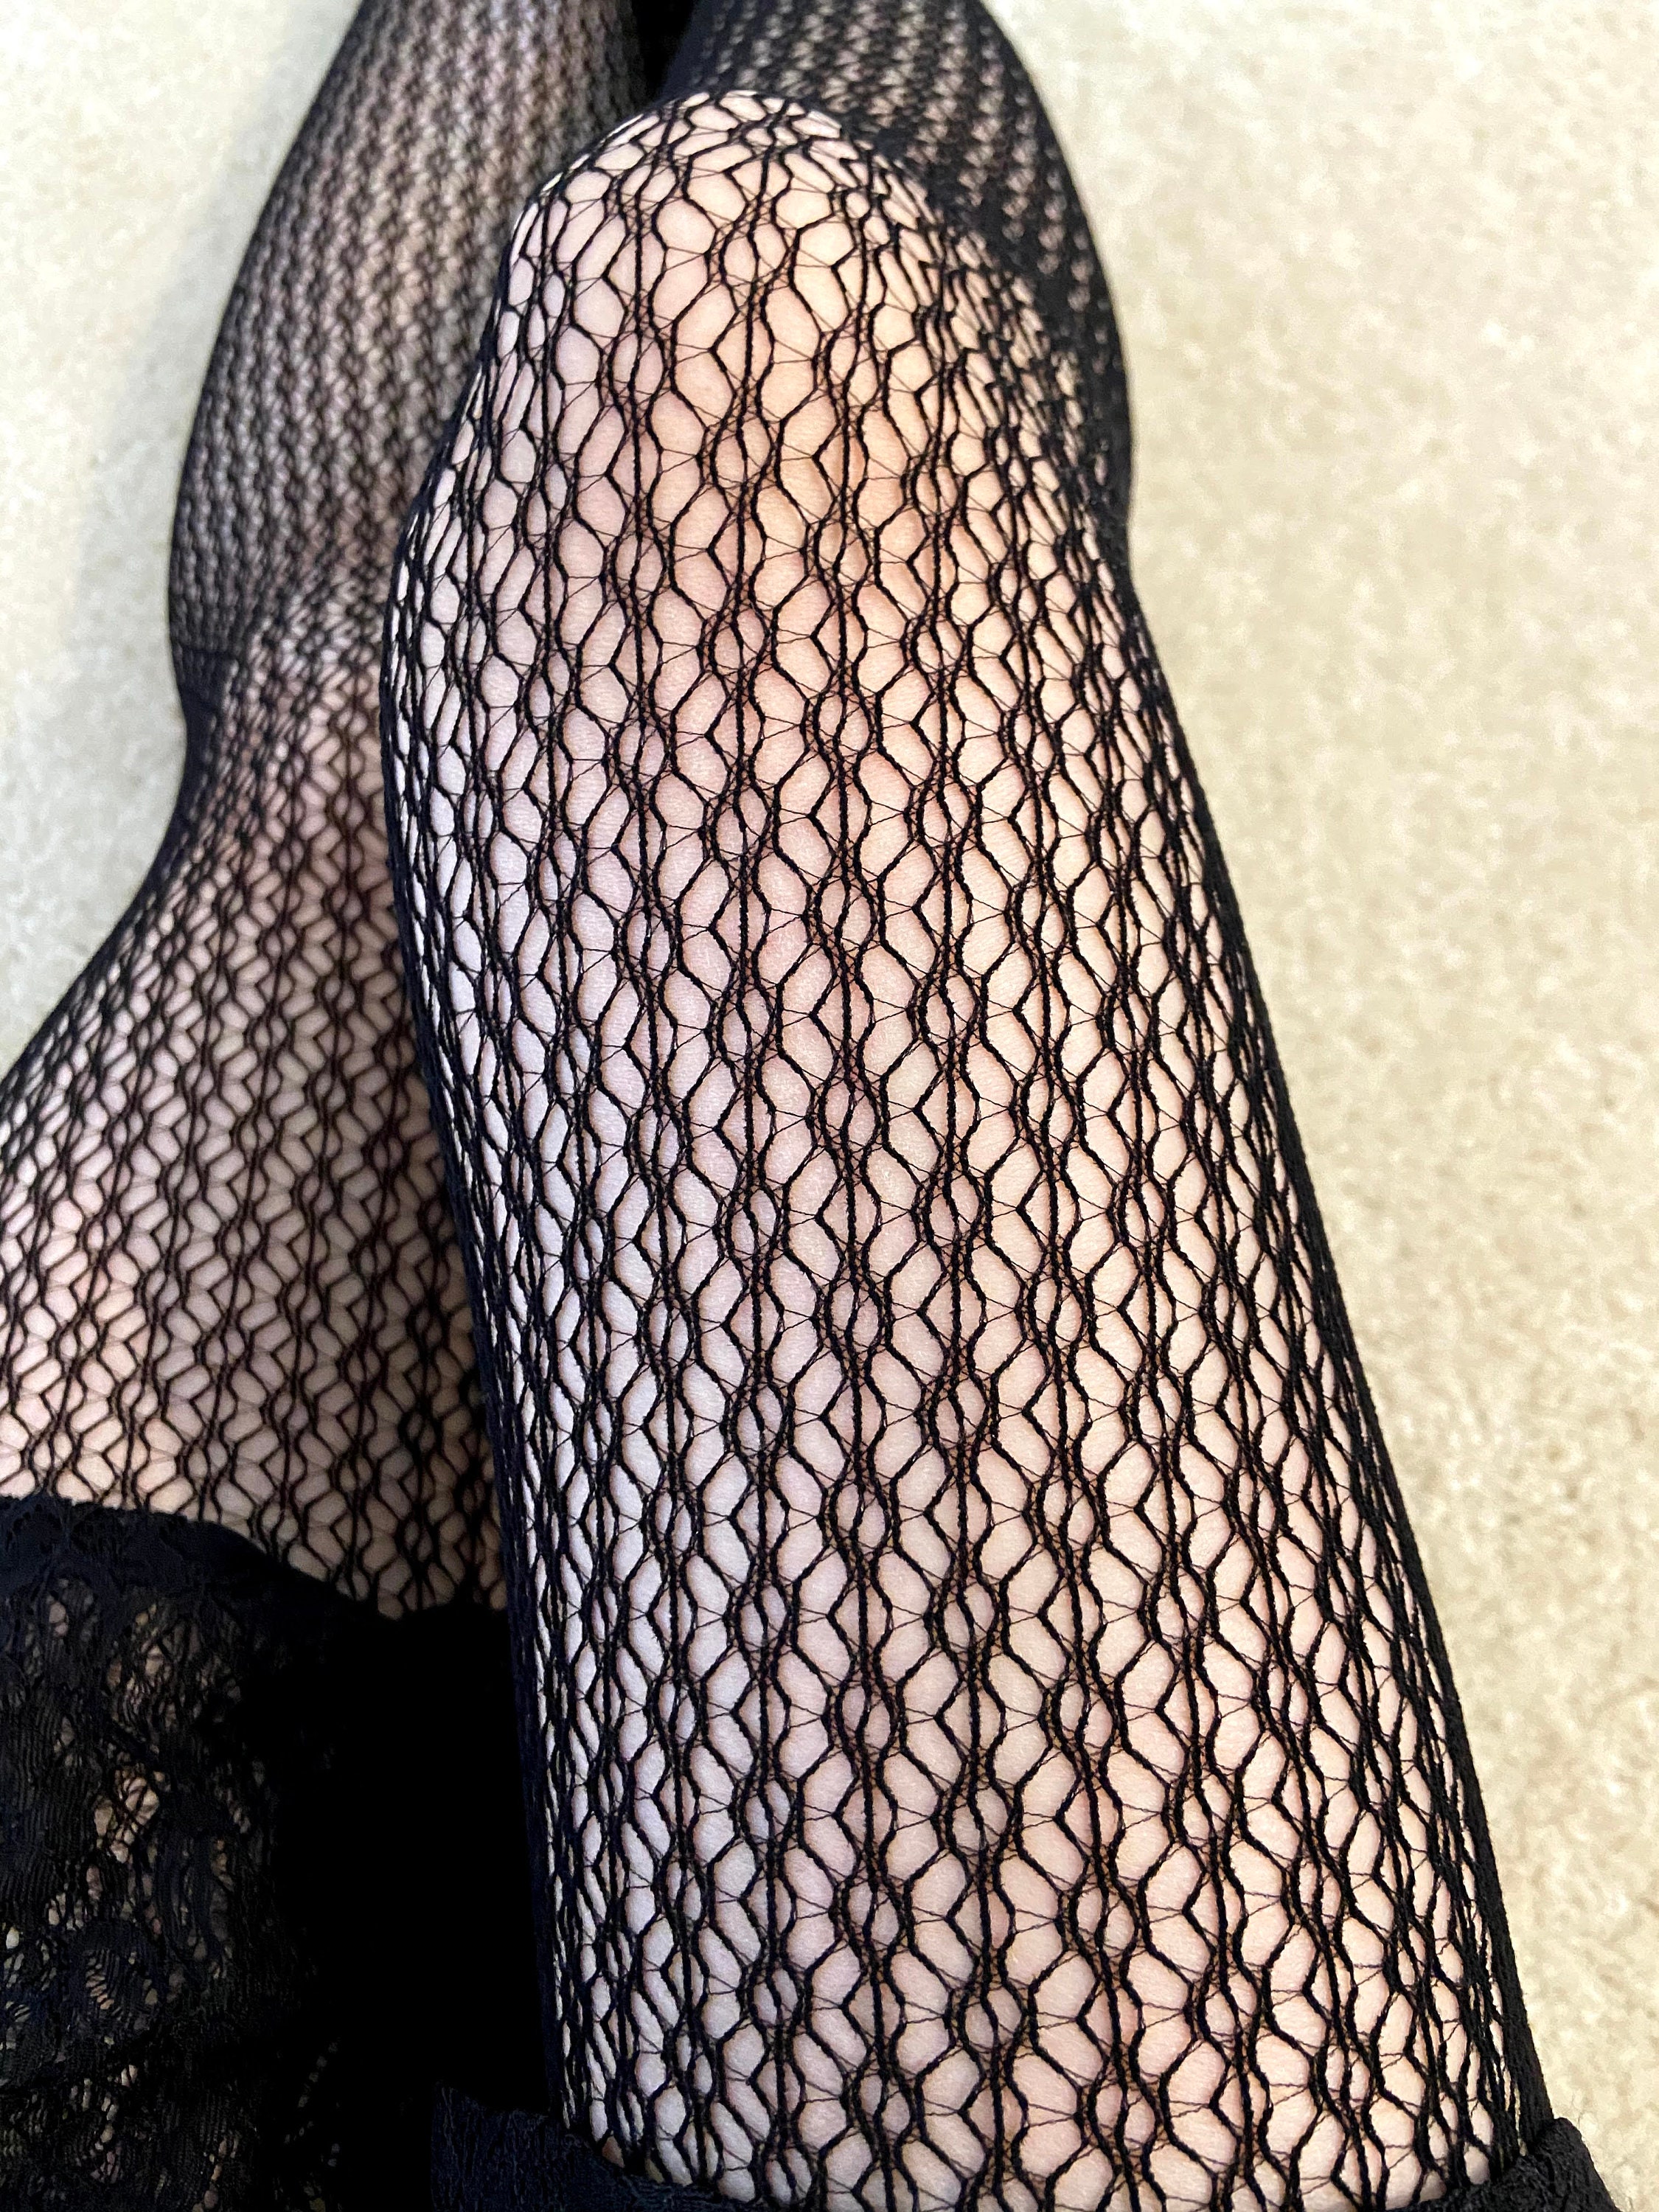 Tights for Women Fishnet Mesh Sexy Black Tights Pantyhose Stocking Gift for  Her -  Canada